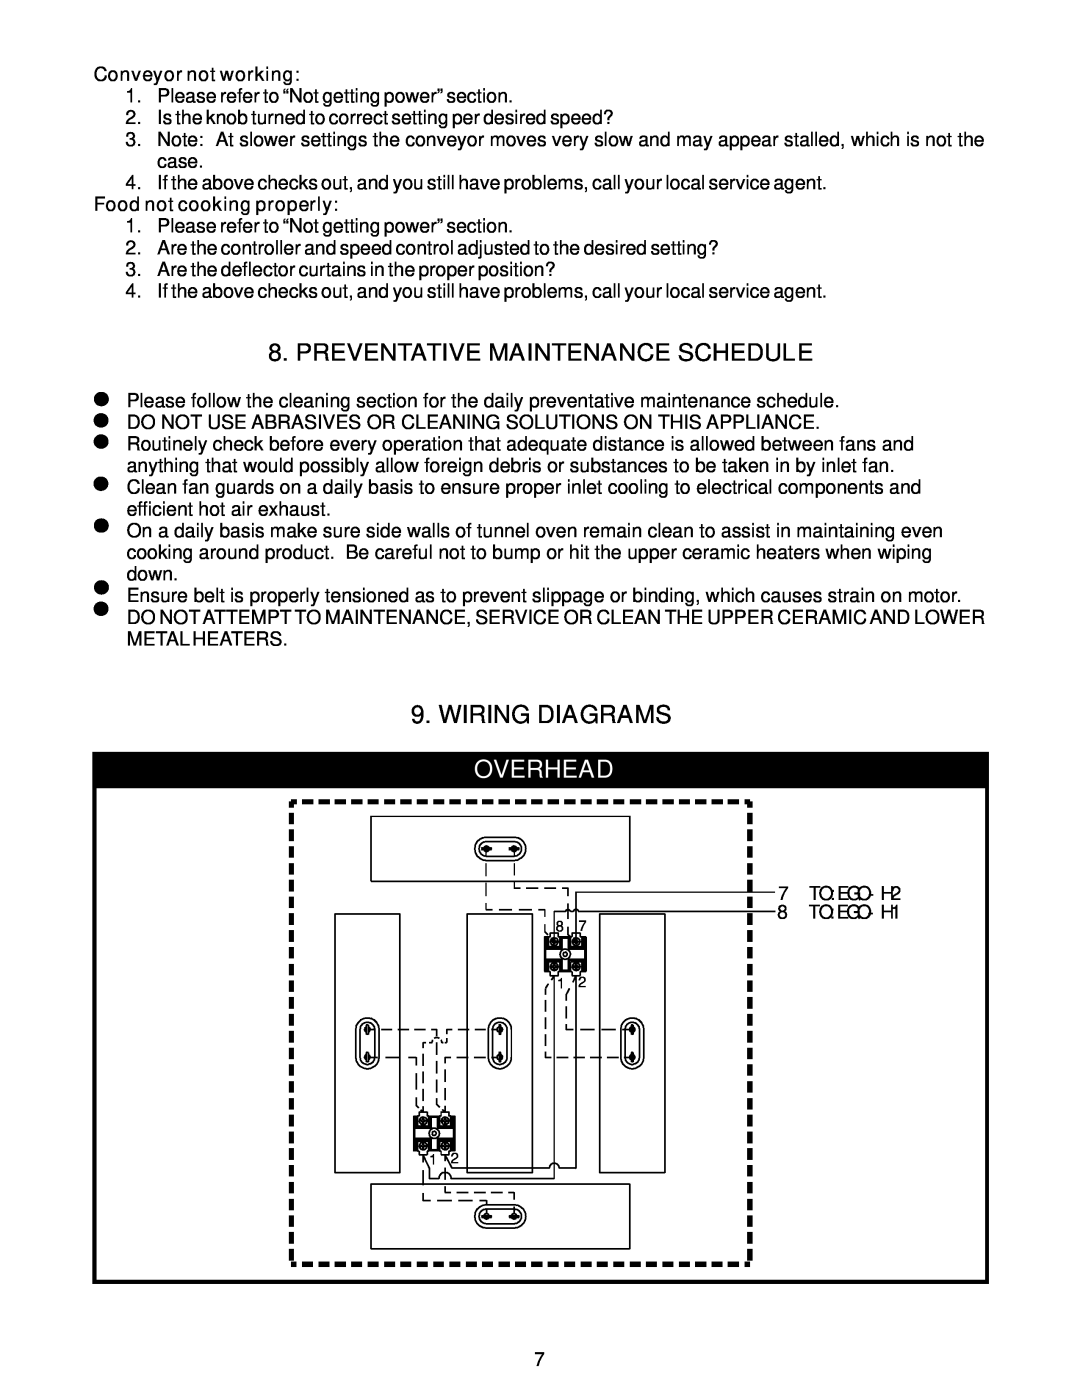 APW Wyott RANSI/NSF4 operating instructions Wiring Diagrams, Overhead, Preventative Maintenance Schedule 